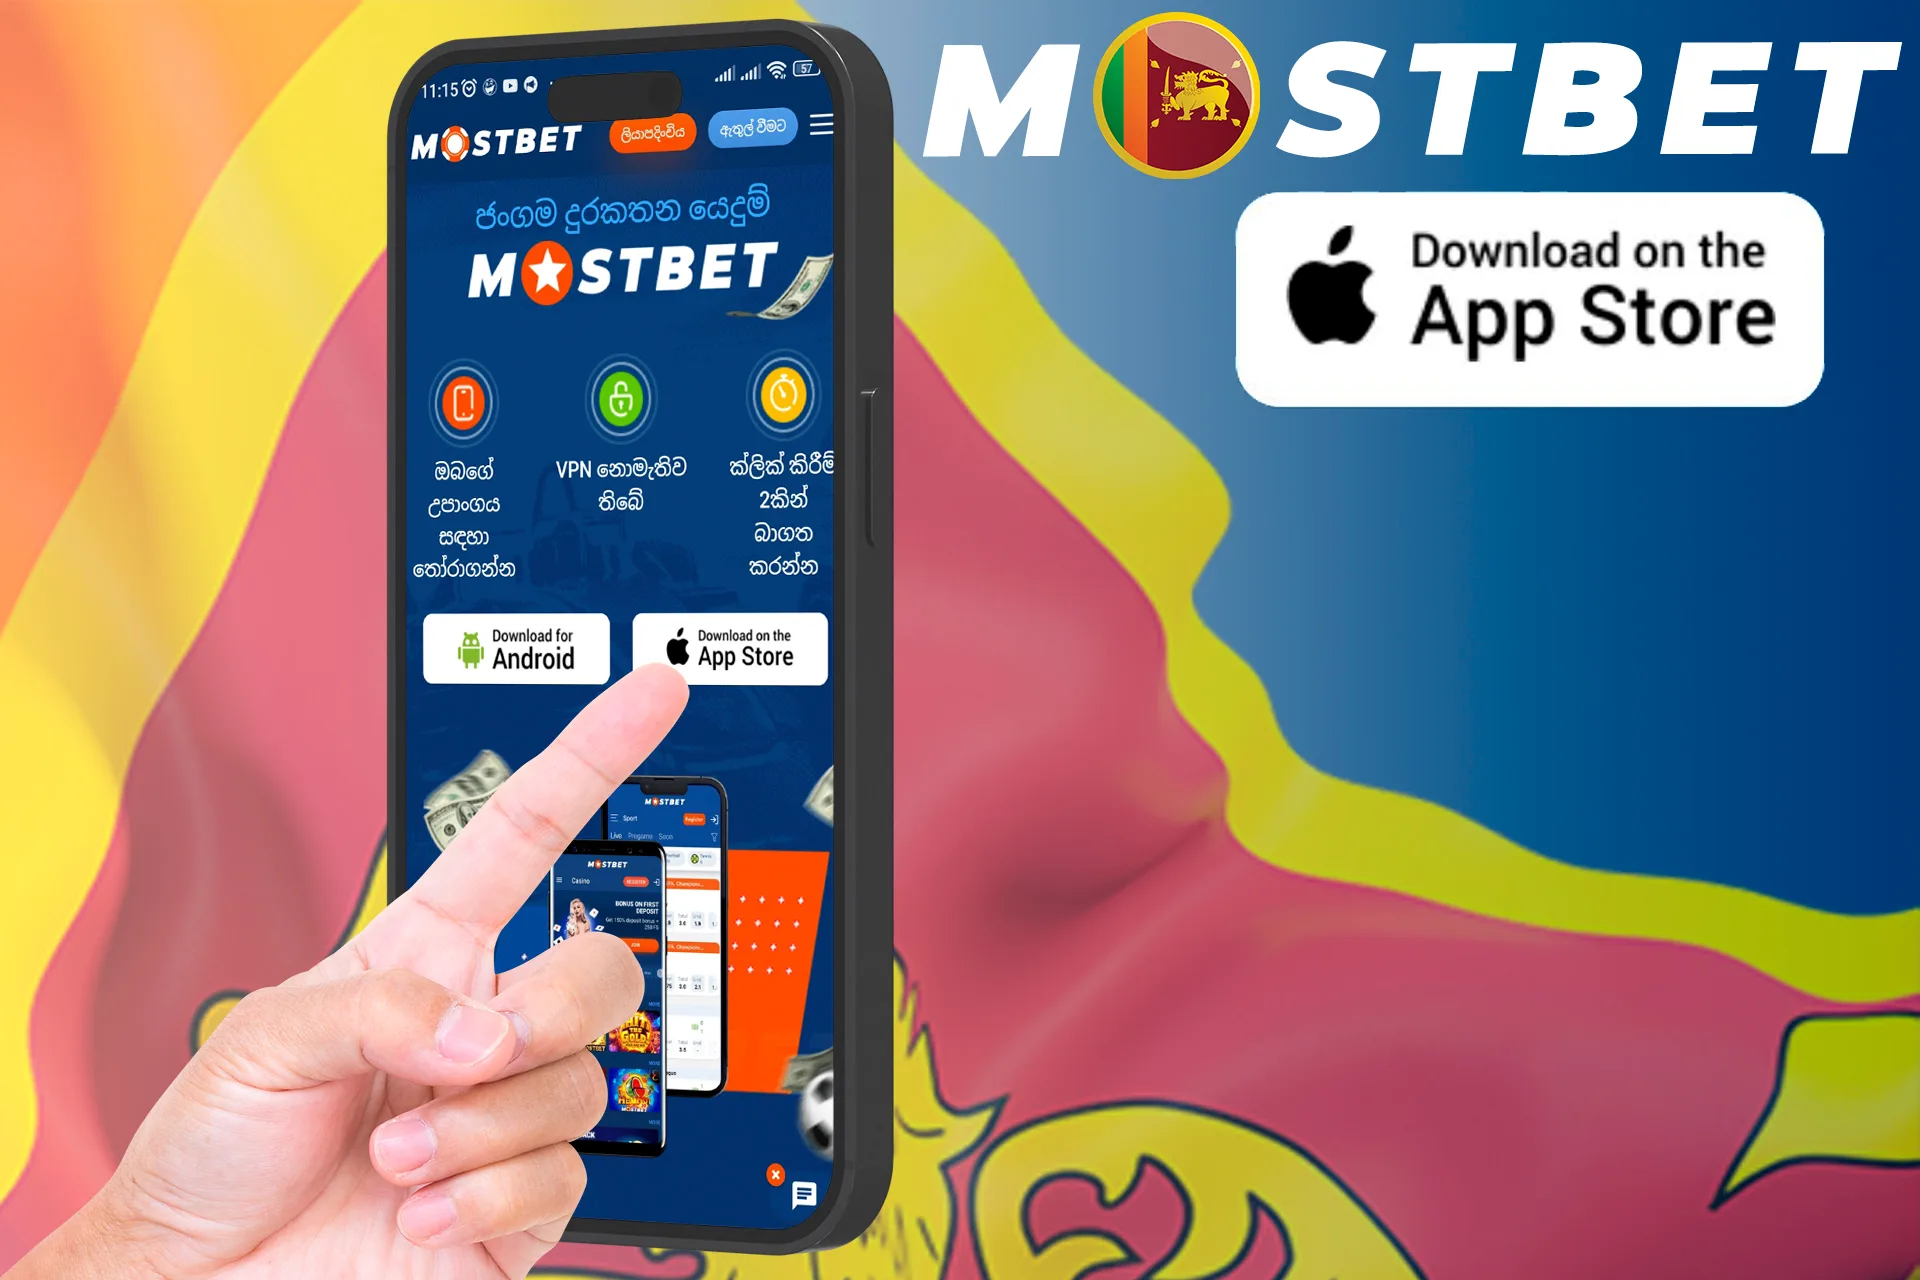 Download the mobile application from Mostbet Sri Lanka on iOS